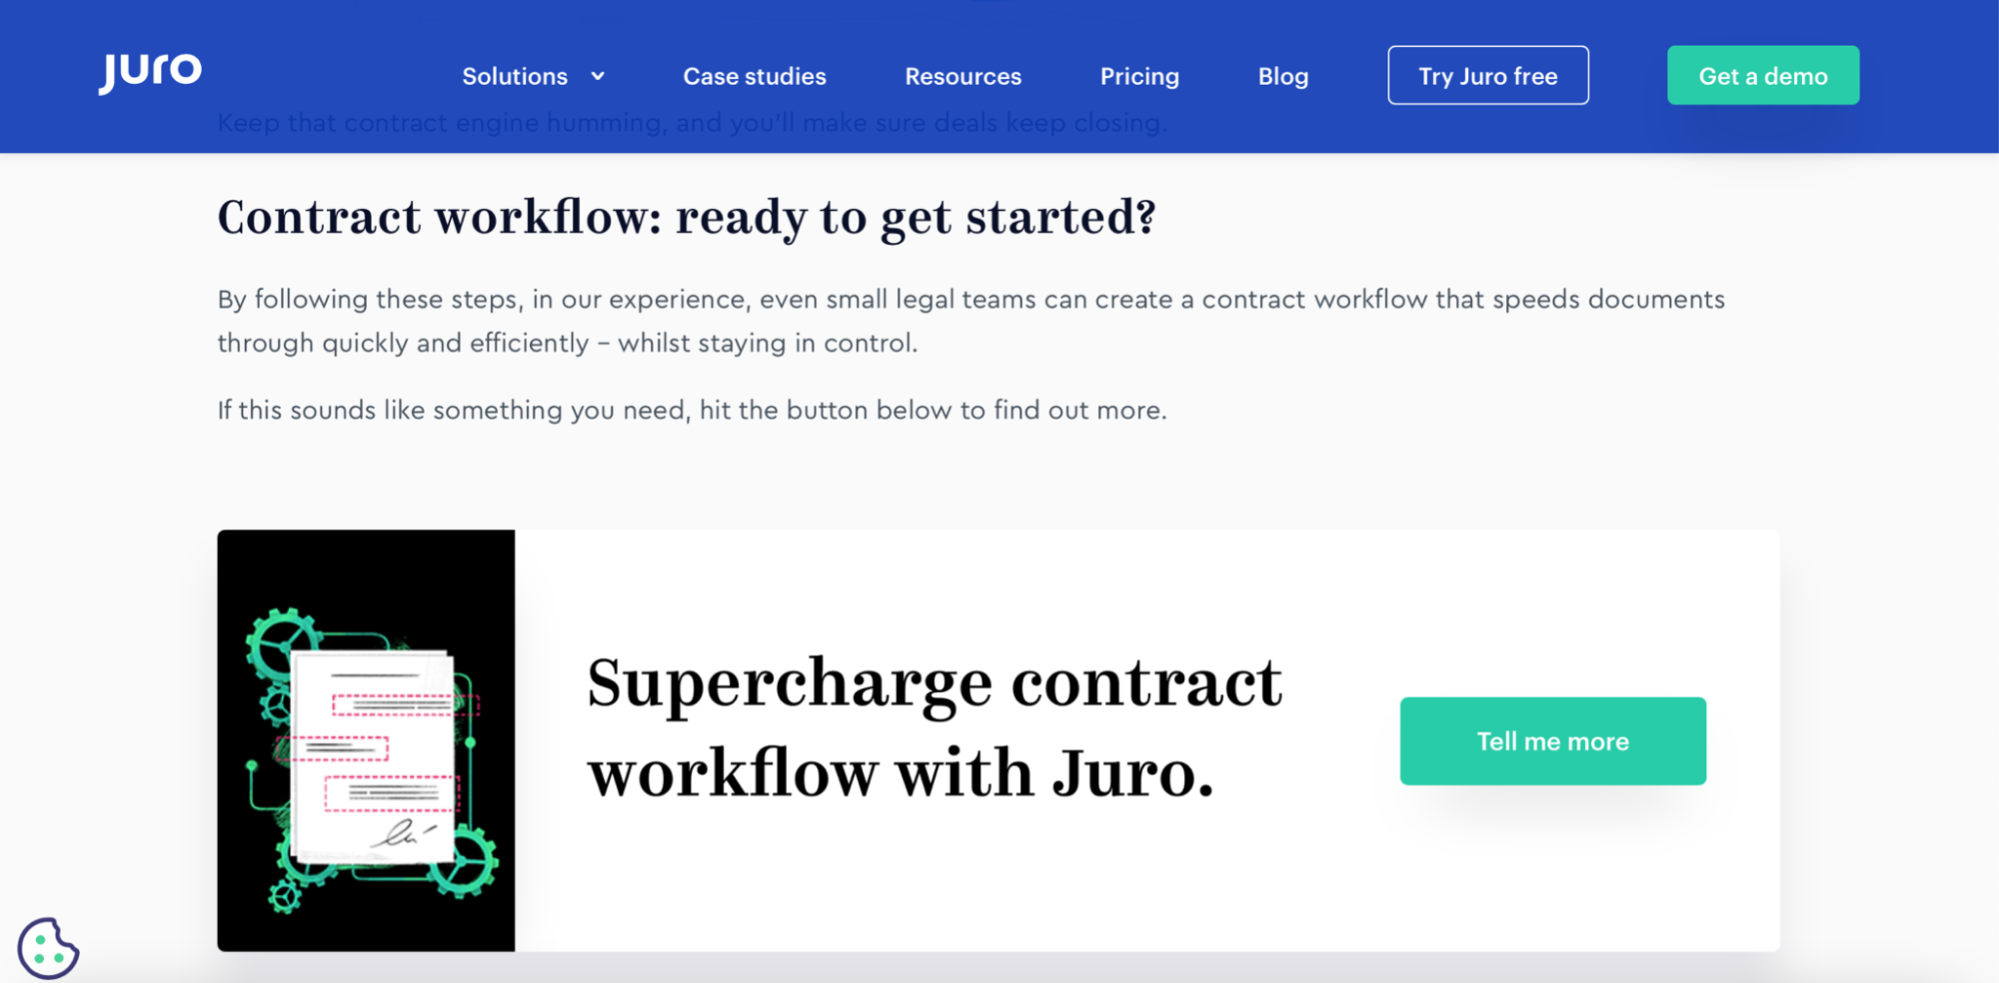 Contract workflow